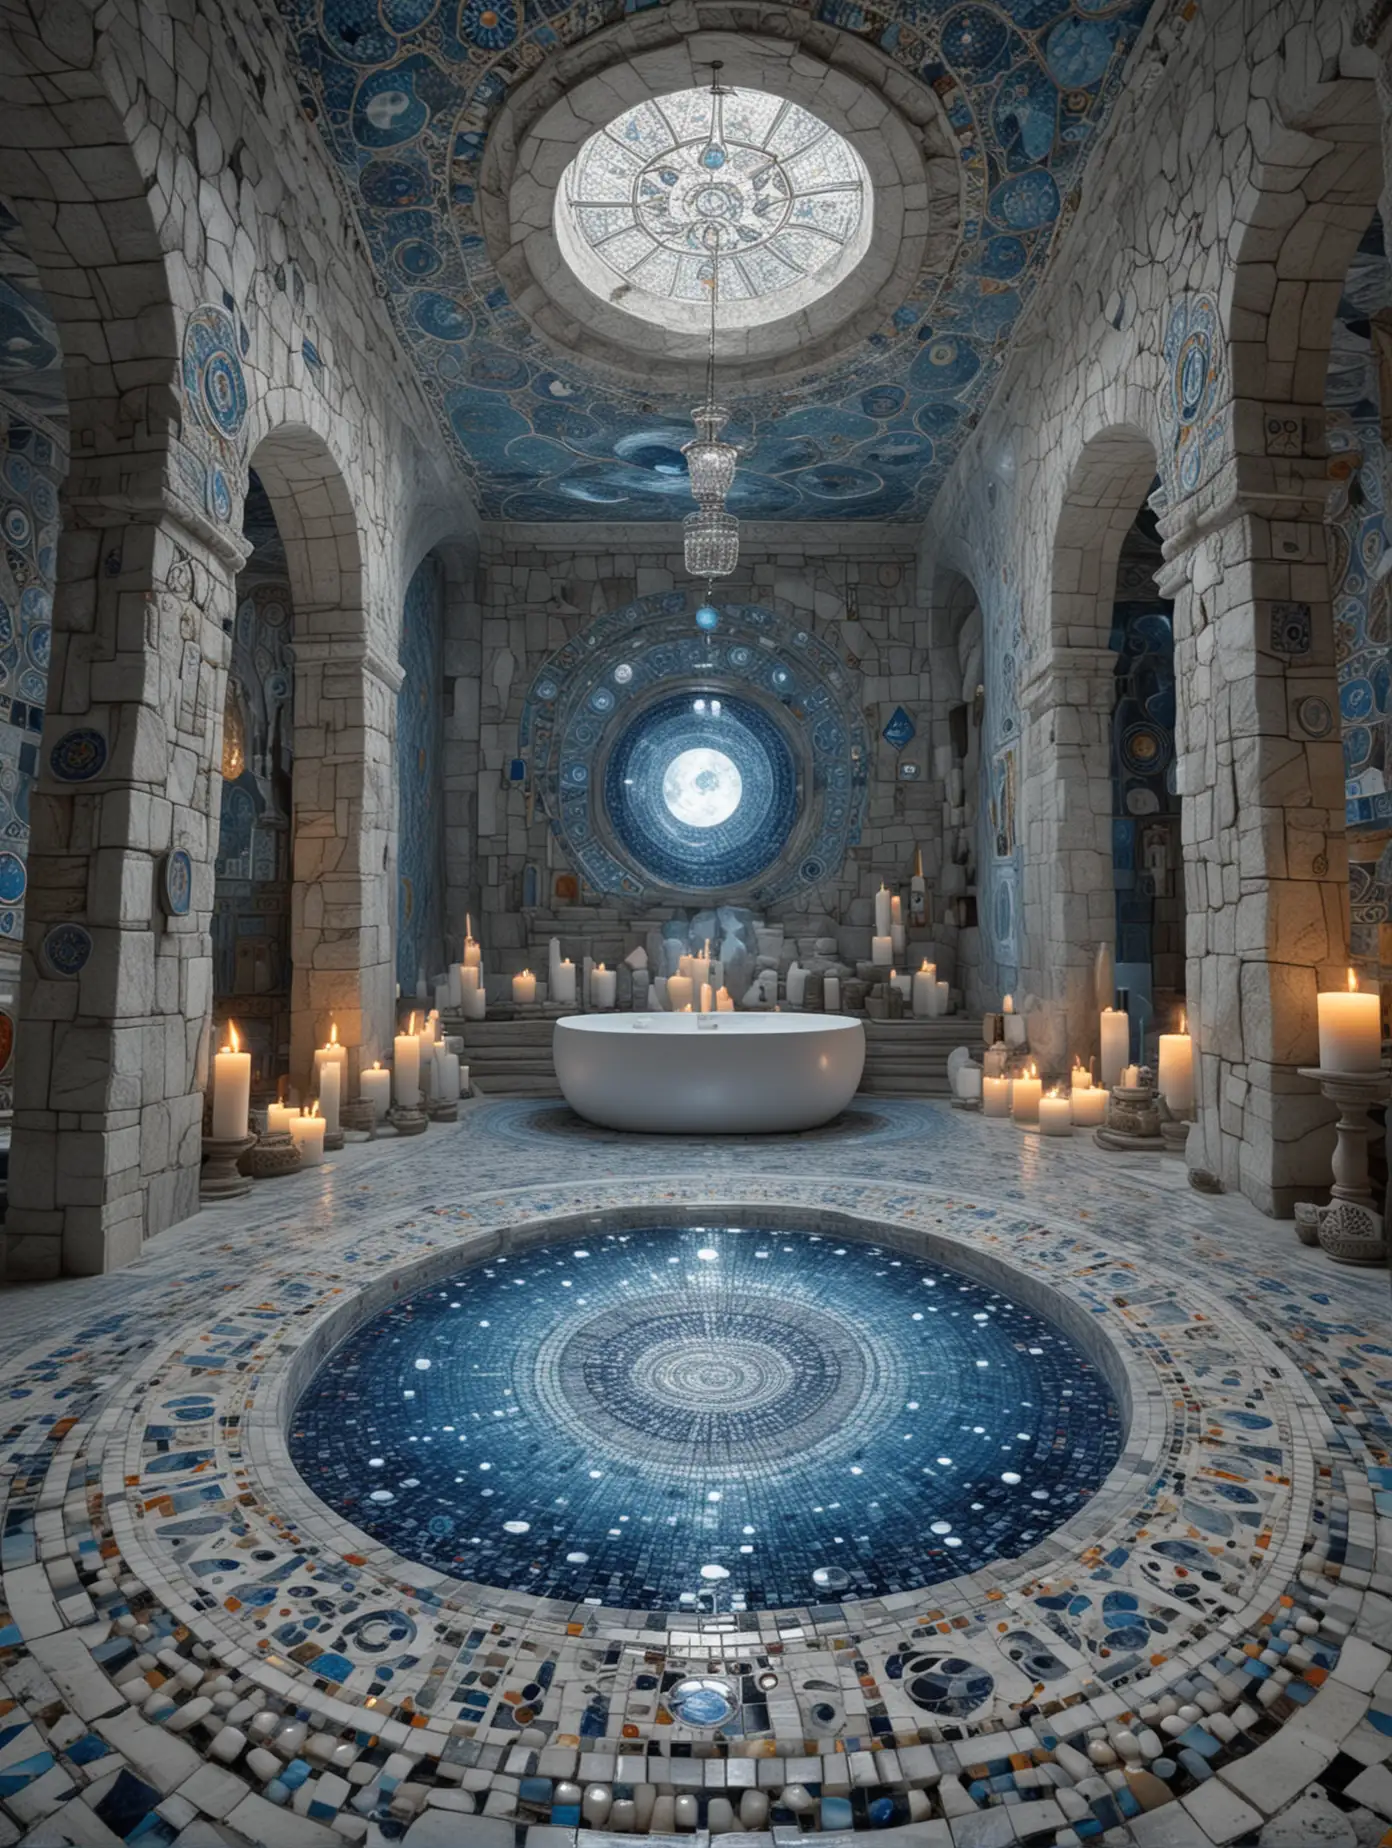 Inside a very detailed white stone nordic spa and pool, distillation instruments in glass, a mosaic floor with blue and colorful fractal patterns, carved walls in white stone with blue and dark alchemical symbols, lit candles, colorful mandala carpets on the floor, a very detailed moon goddess sculpture, clear,dark nordic atmosphere, highly detailed,high precision,focus on textures, hyperrealistic,bright